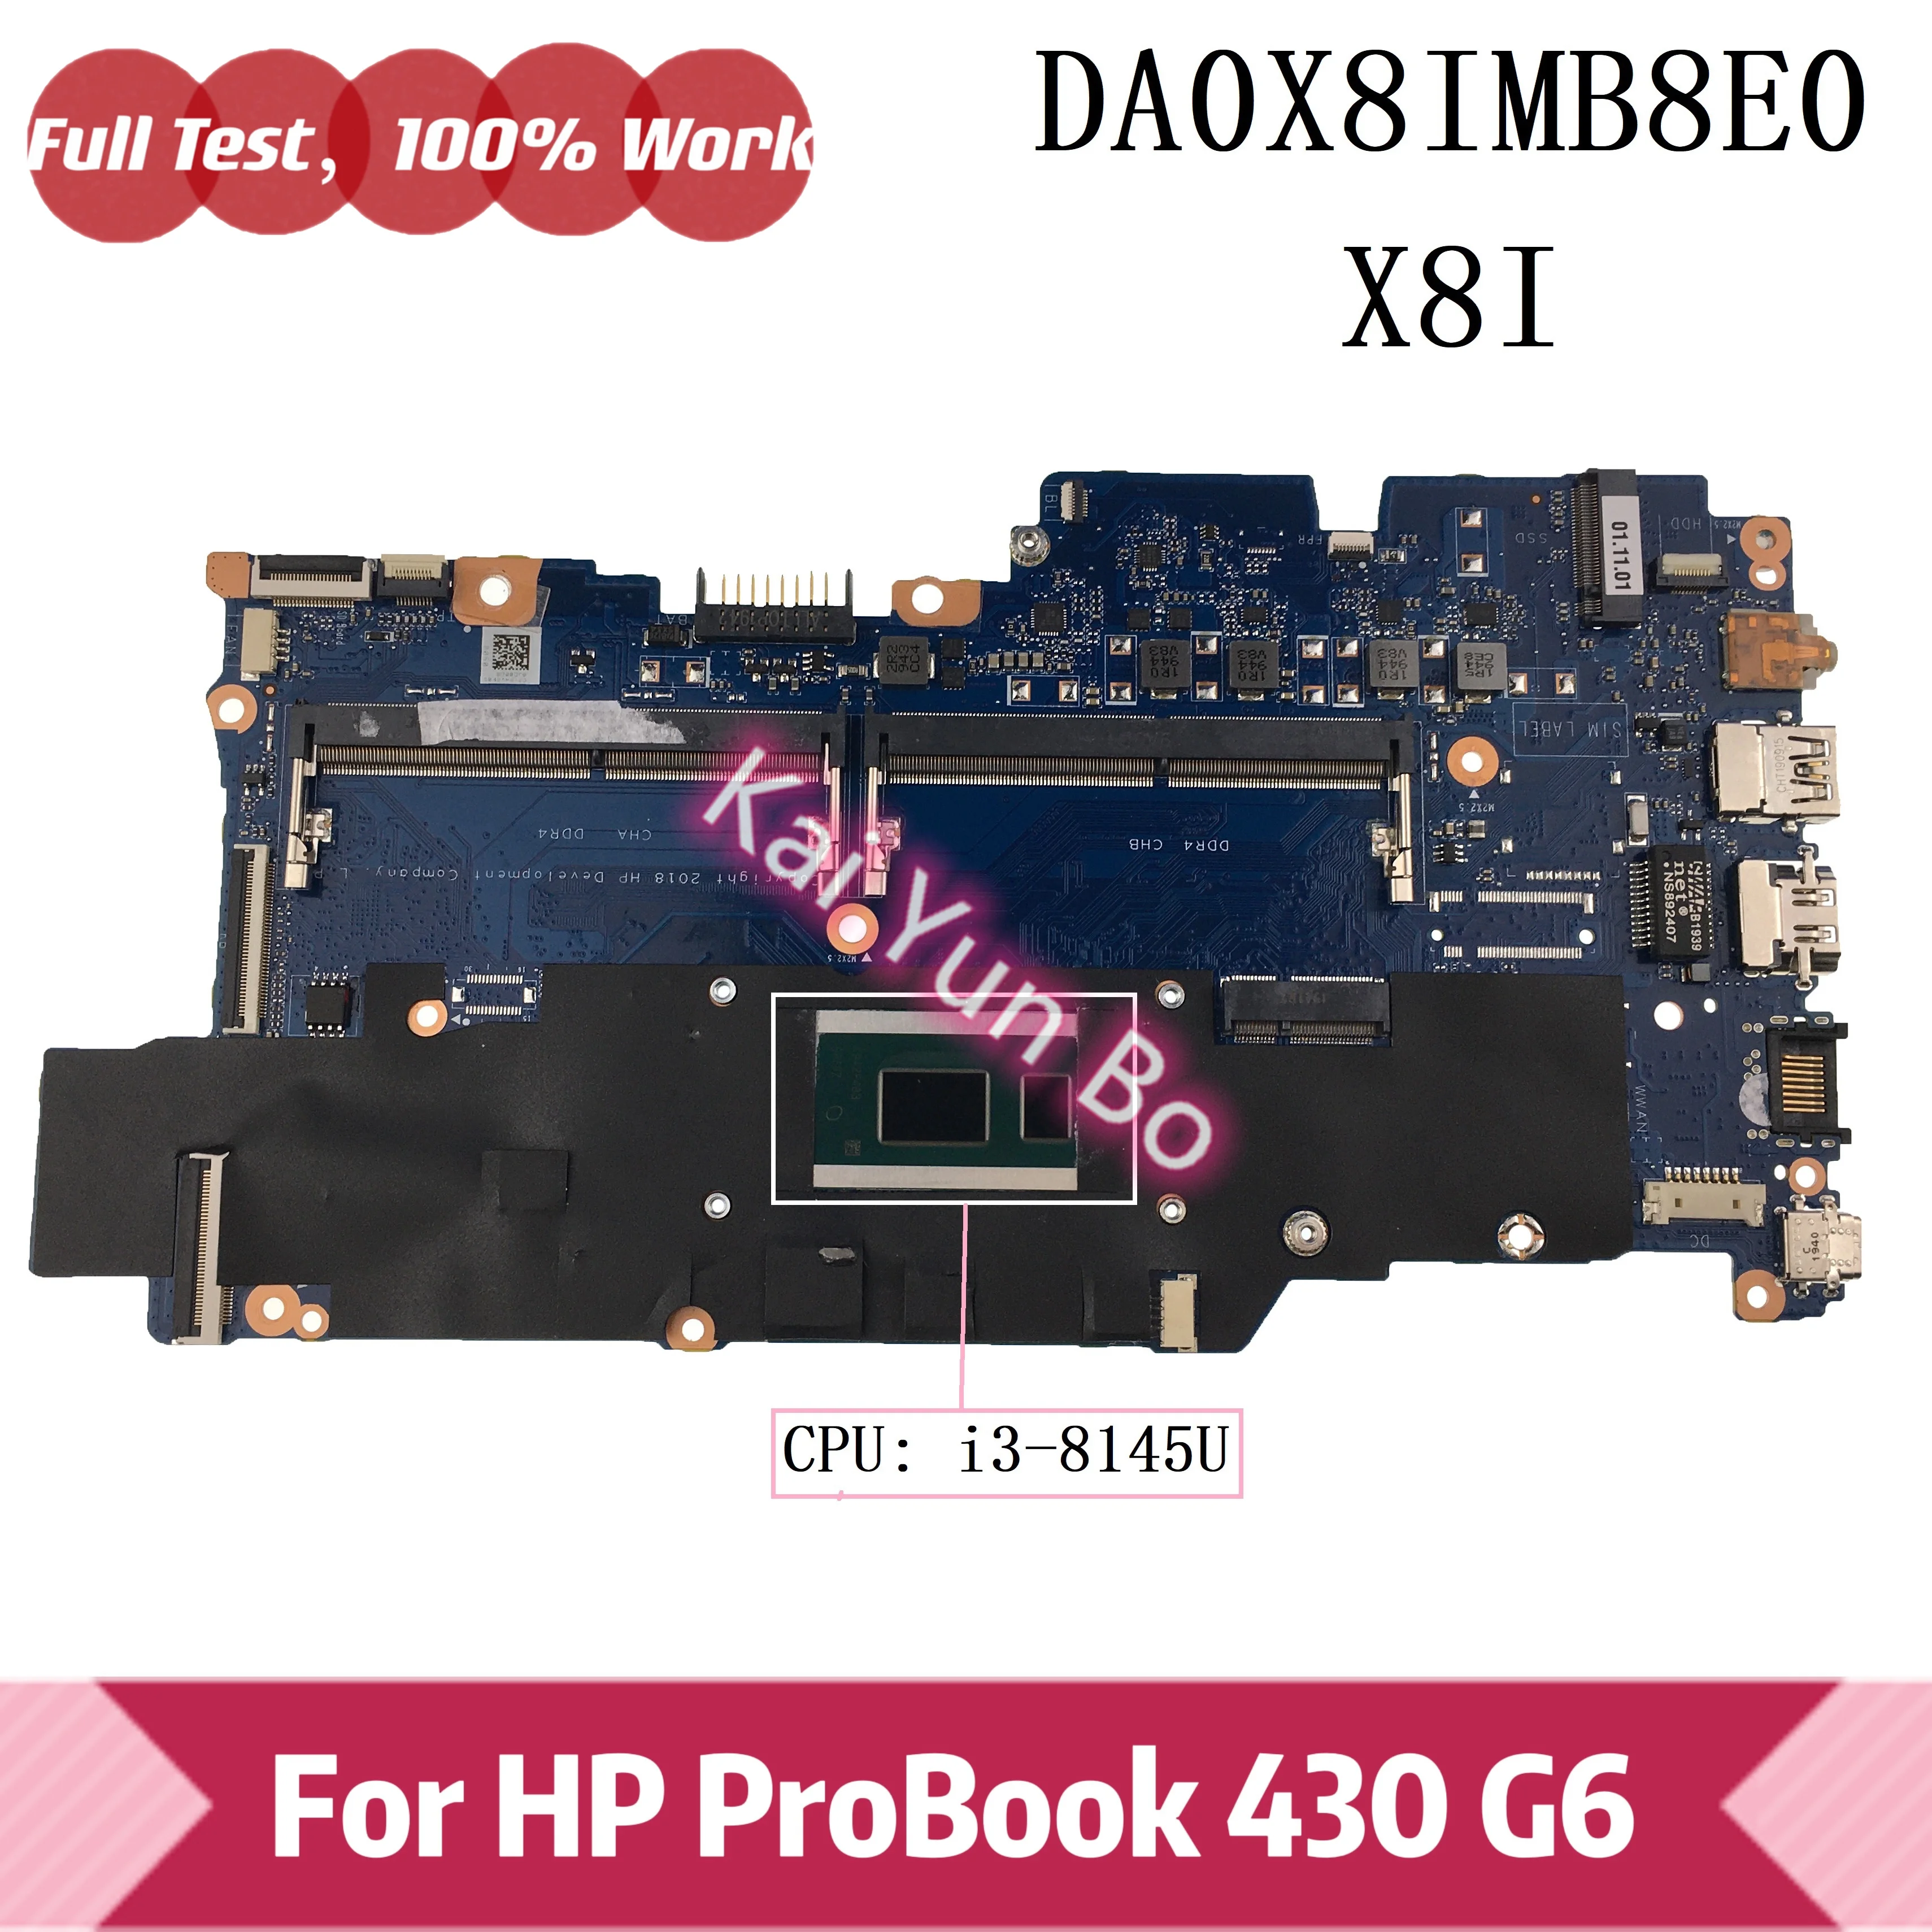 

Mainboard X8I DA0X8IMB8E0 For HP ProBook 430 G6 ZHAN 66 Pro 13 G2 Laptop Motherboard With i3-8145U CPU DDR4 100% Tested Working